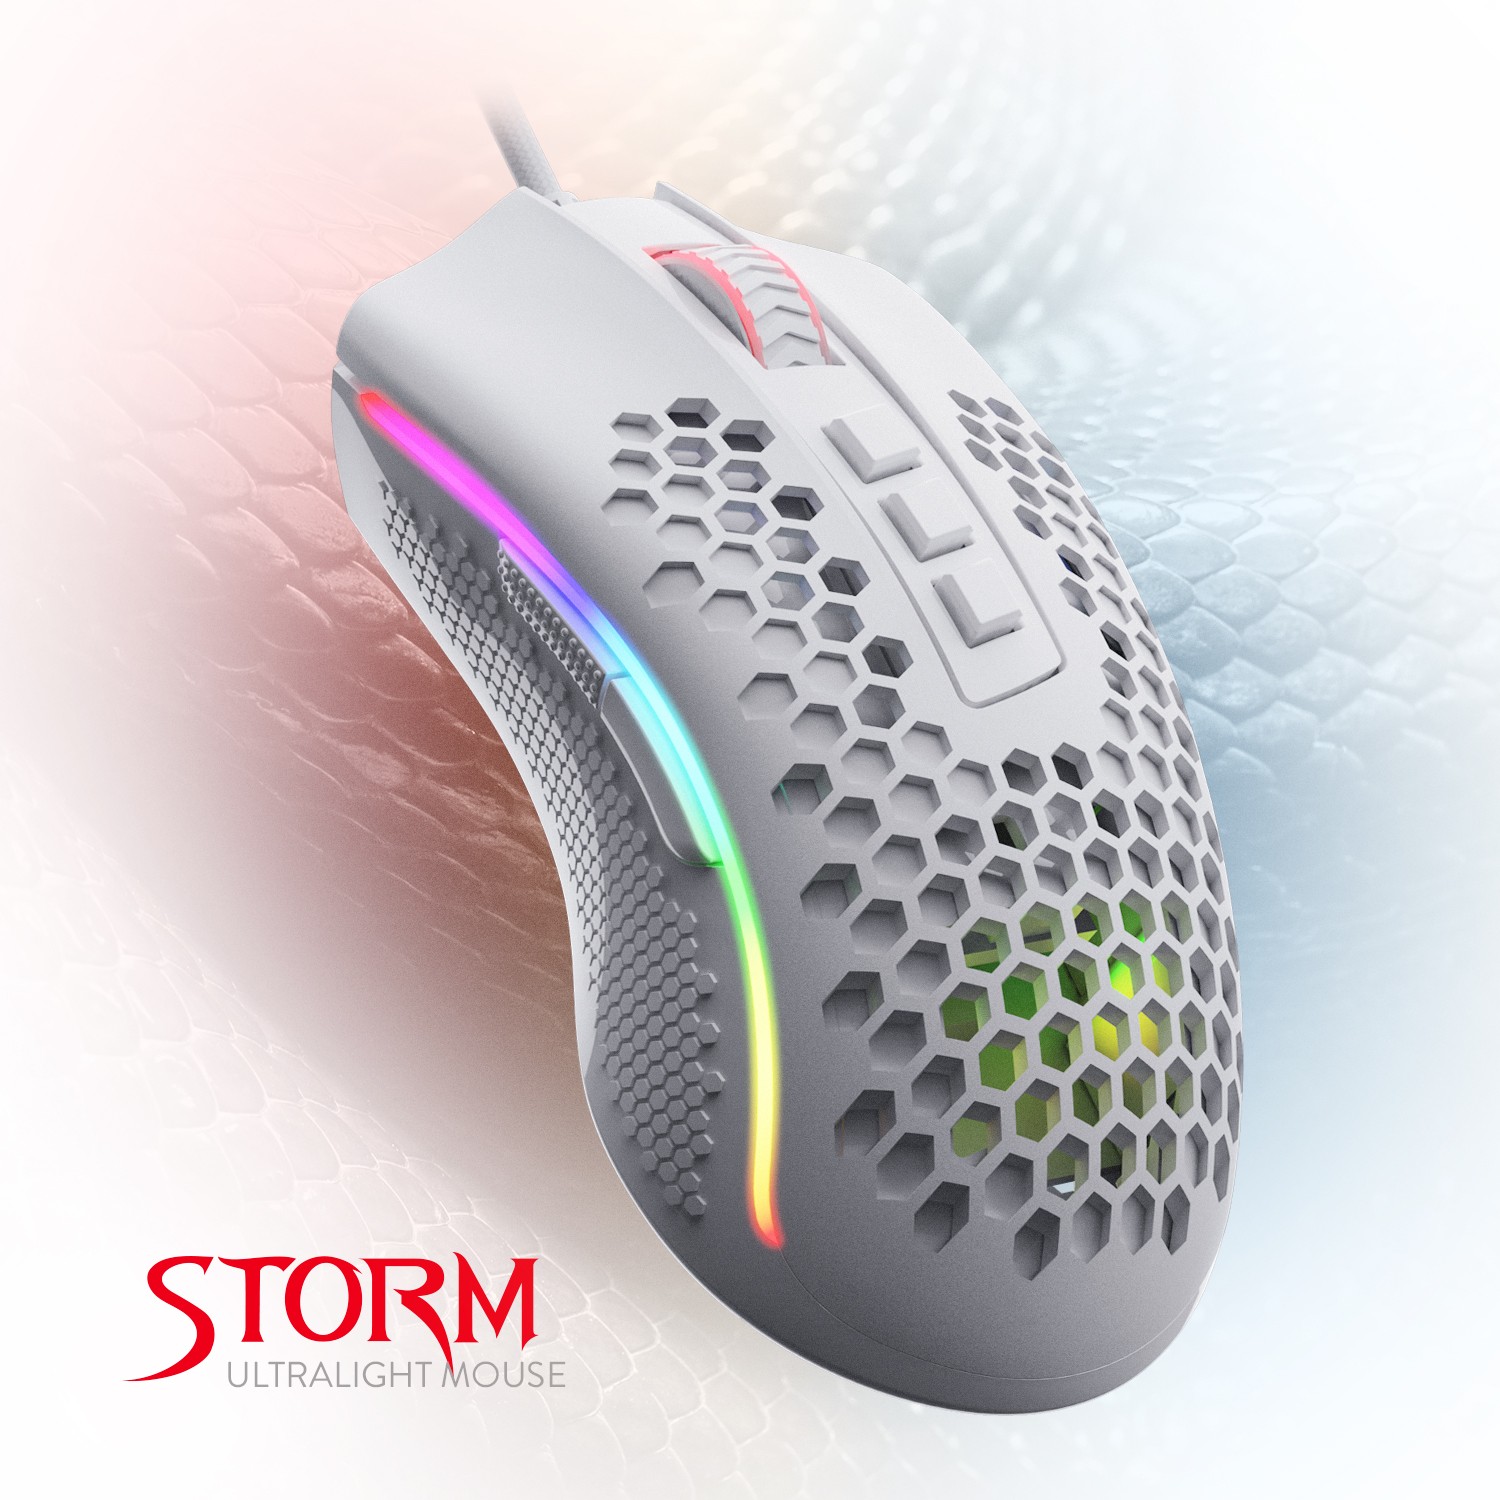 Redragon M808 Storm Lightweight RGB Gaming Mouse, 85g Ultralight Honeycomb Mouse